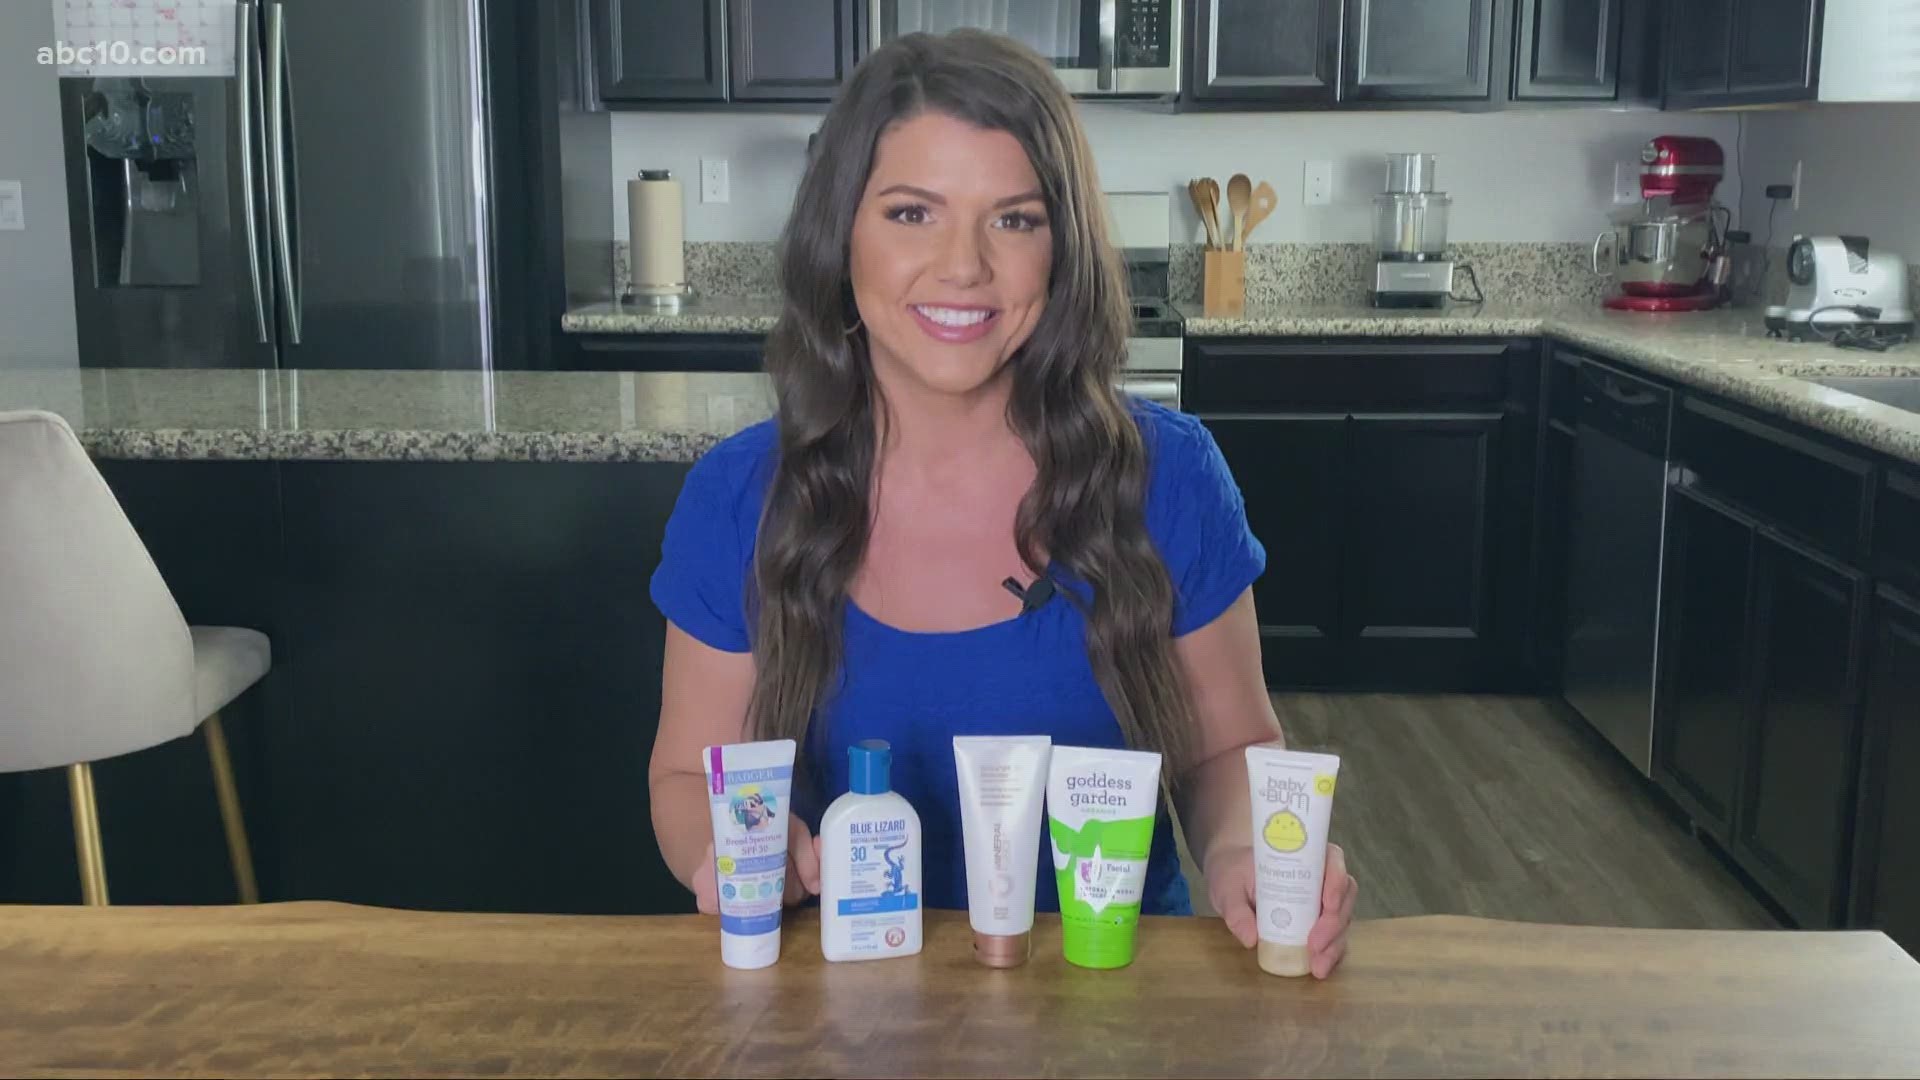 Reaching for the sunscreen as temps warm up? Megan Evans joins us with some healthy options for the family.